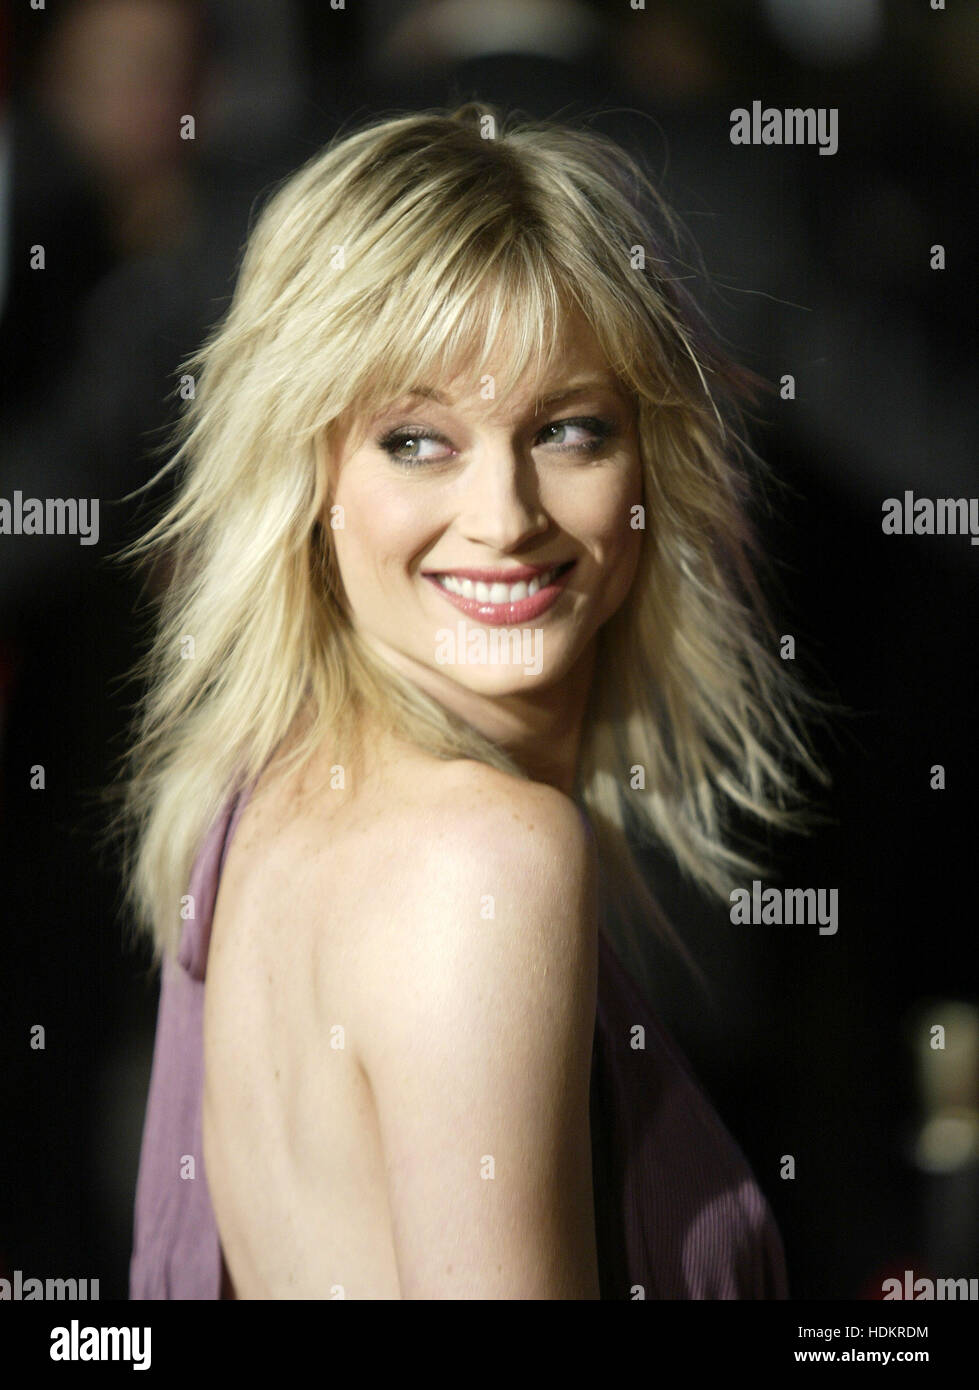 Actress Teri Polo at the premiere of the film, 'Meet The Fockers'  on December 16, 2004 in Los Angeles. Photo credit: Francis Specker Stock Photo